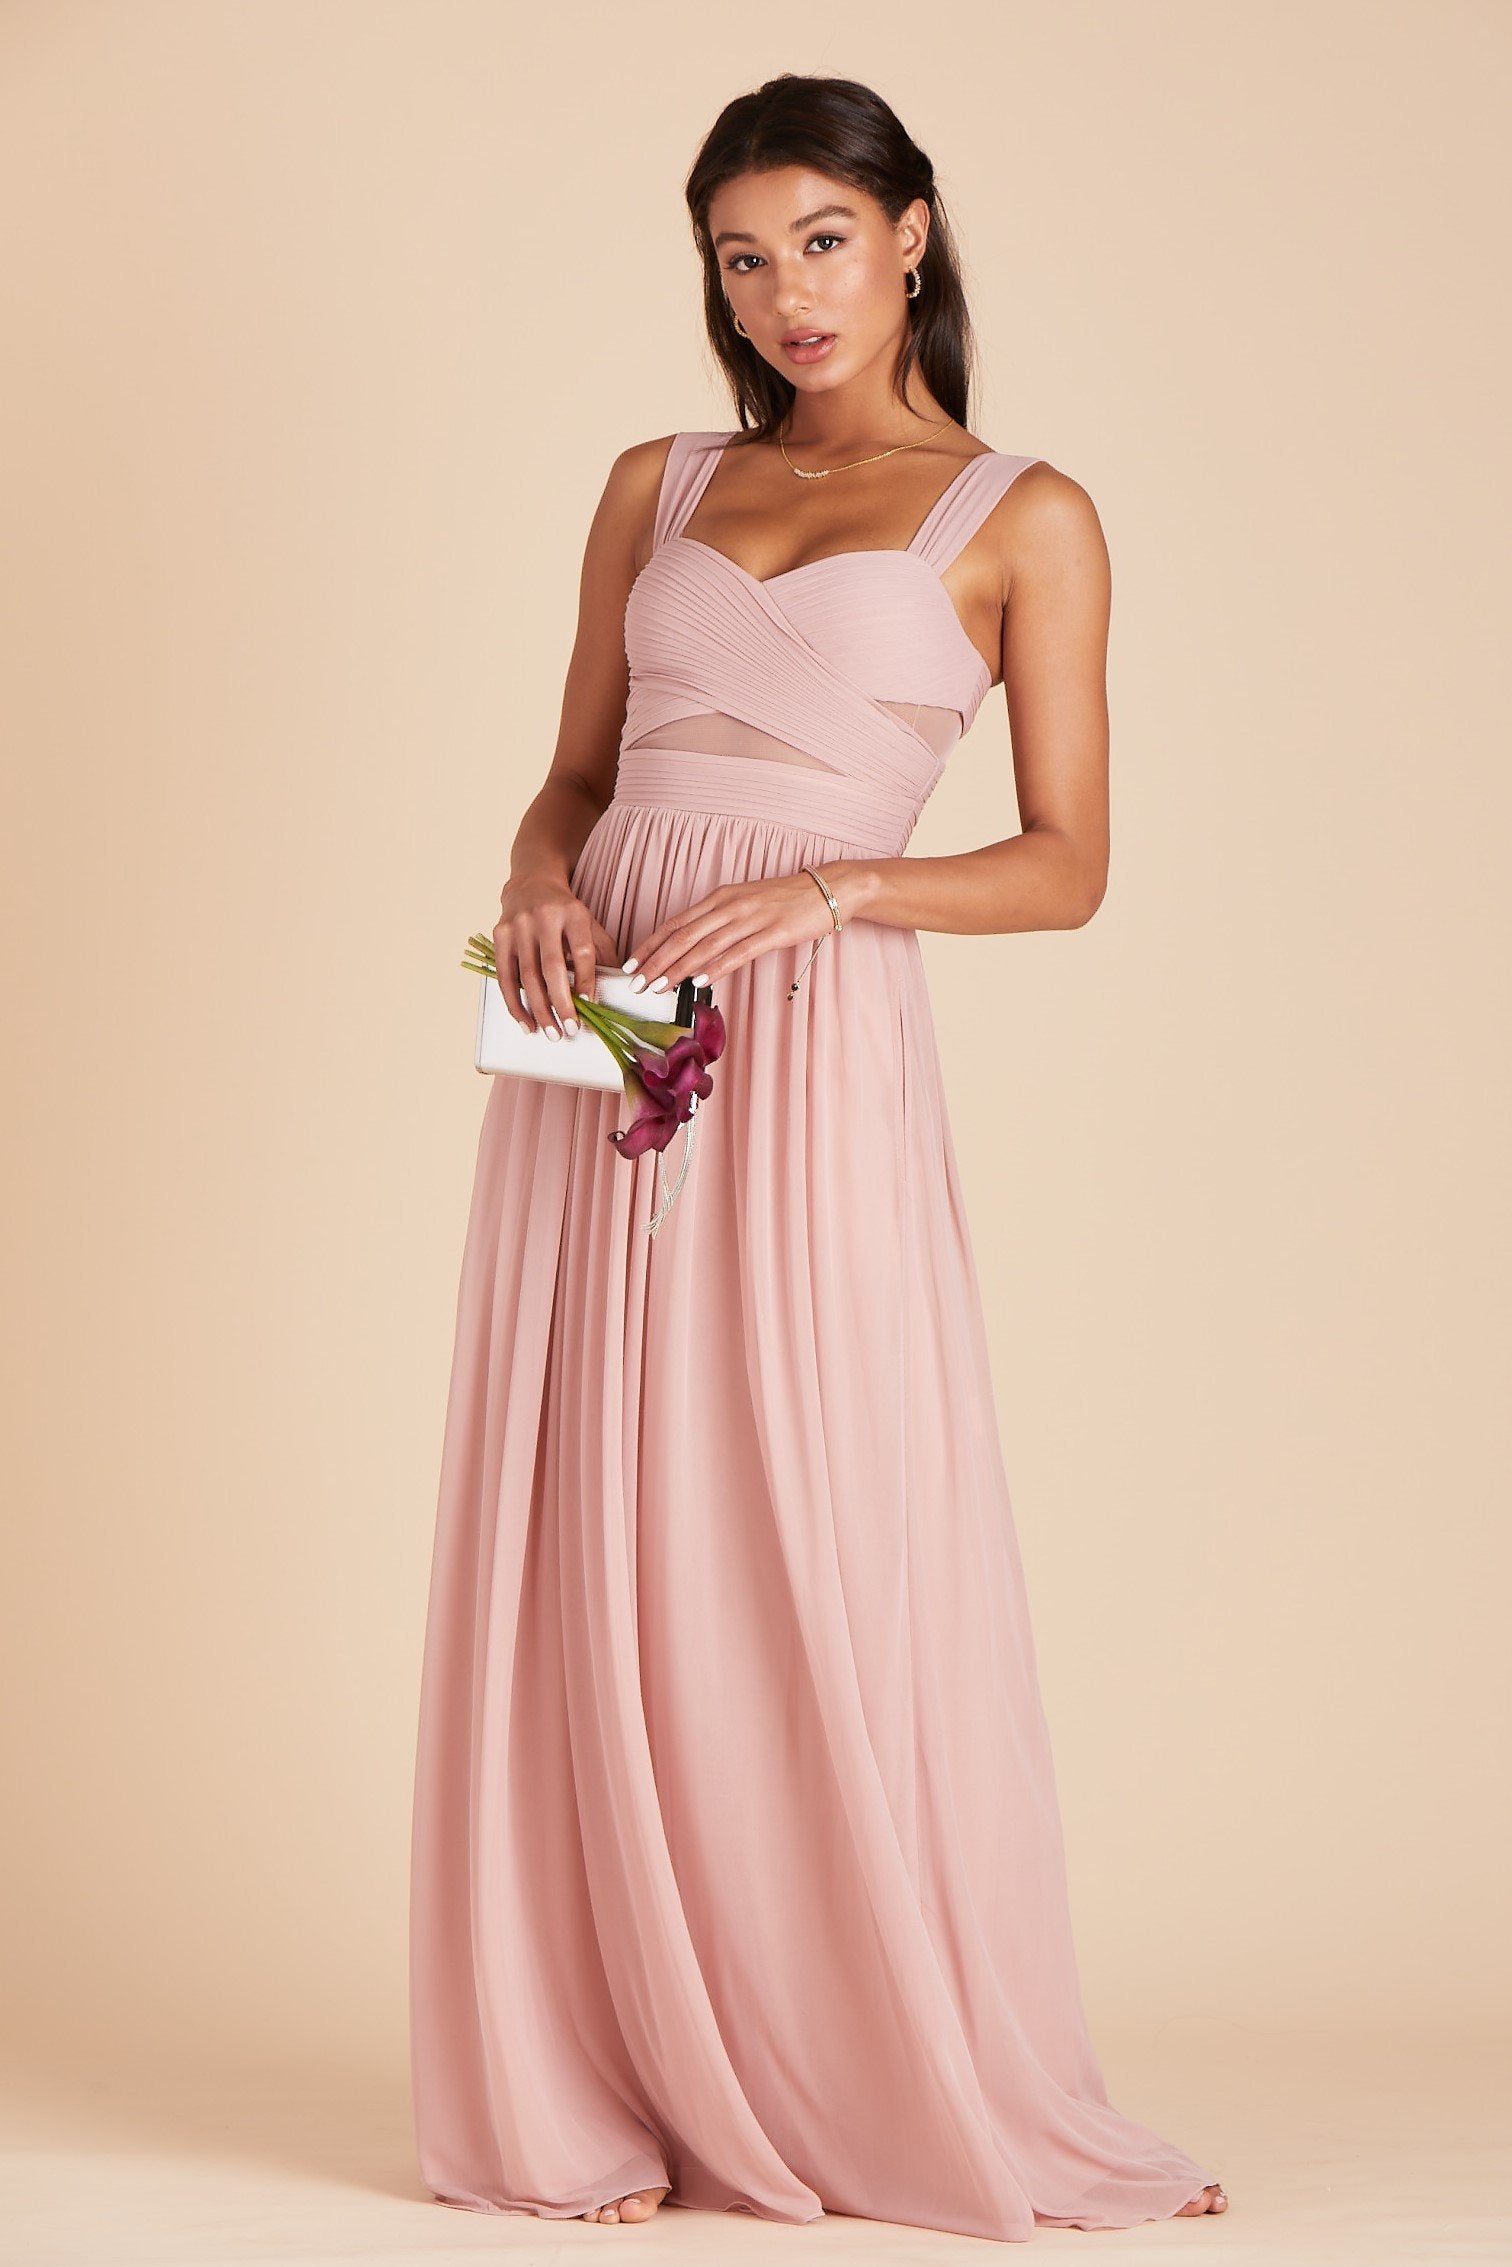 Front view of the Elsye Bridesmaid Dress in dusty rose mesh features a fitted bust and waist with peekaboo cutouts showing a hint of skin at the waist and under each arm.